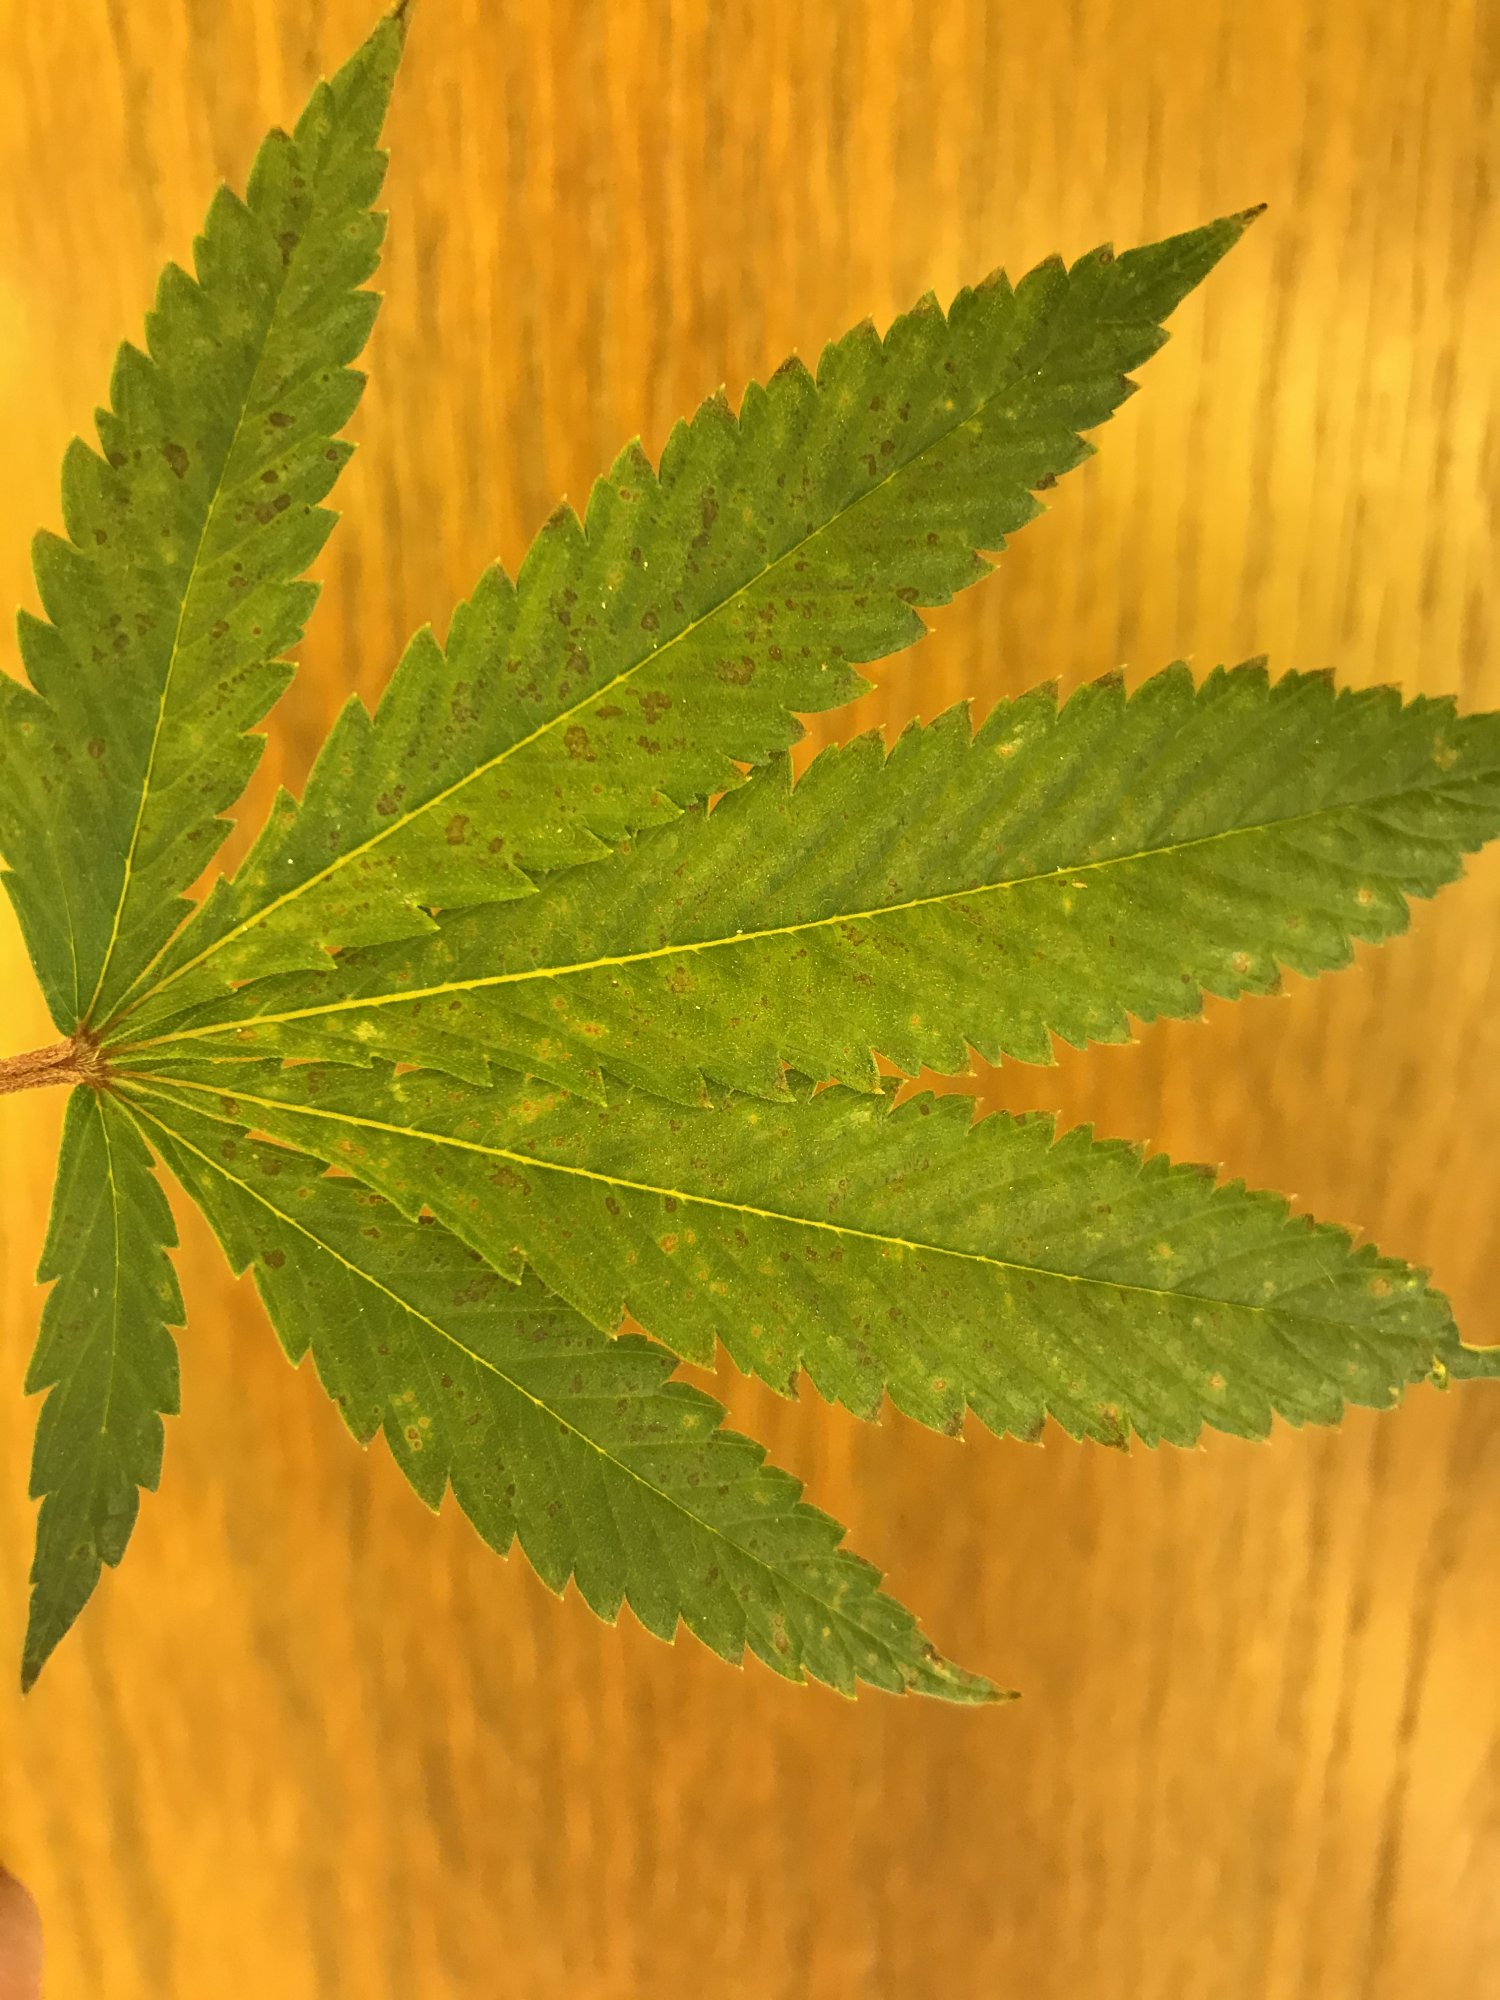 Leaf with red spot problems please help